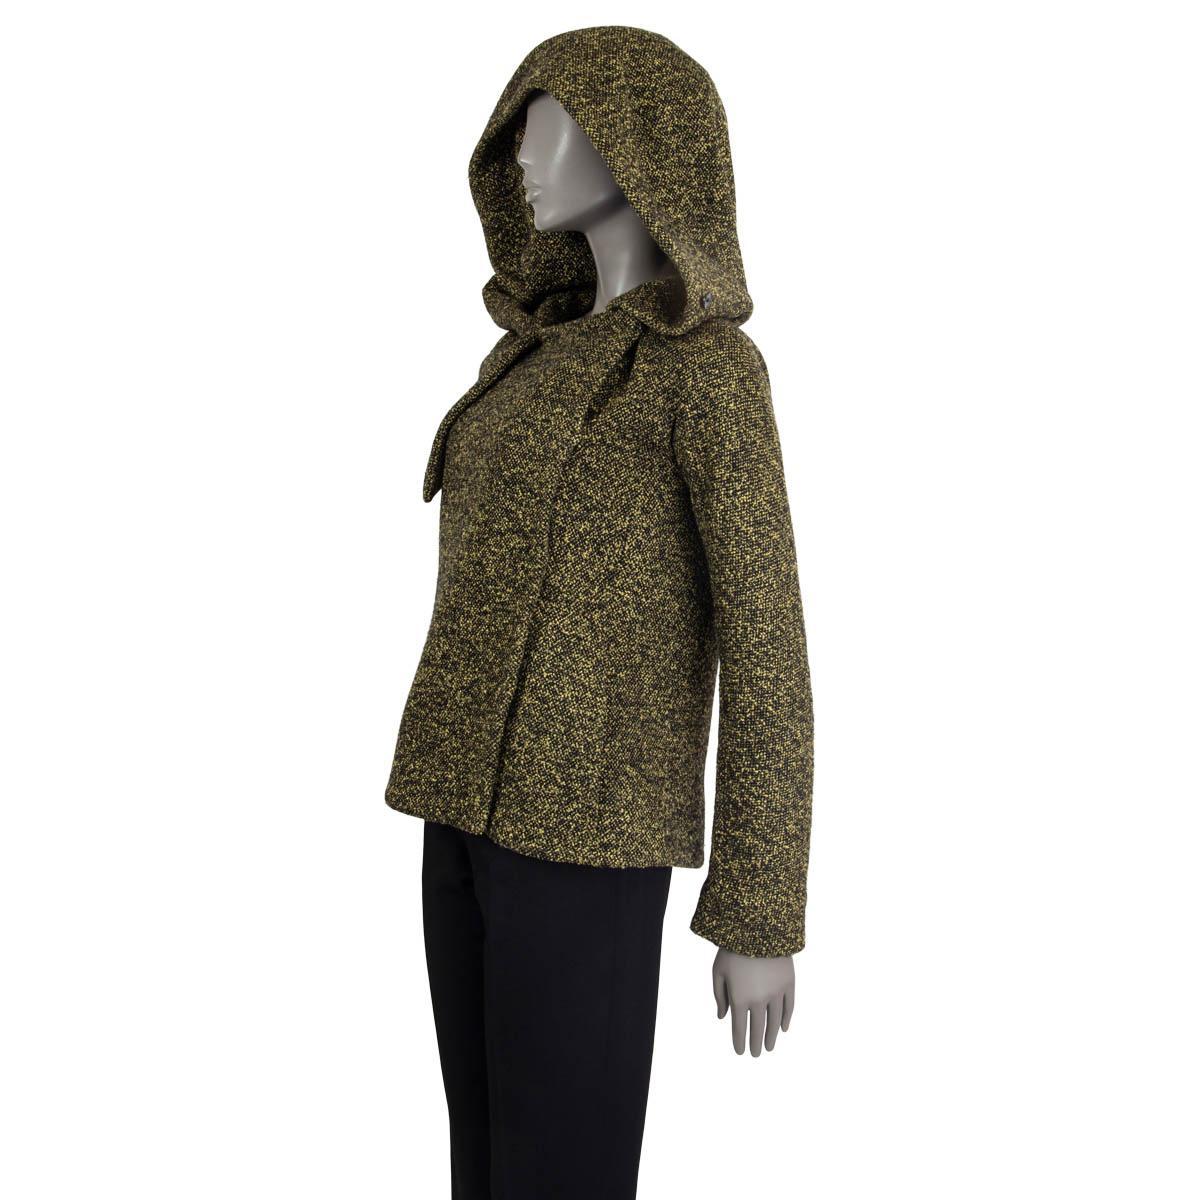 JIL SANDER black & yellow wool TWEED OVERSIZED HOOD Jacket 36 S In Excellent Condition For Sale In Zürich, CH